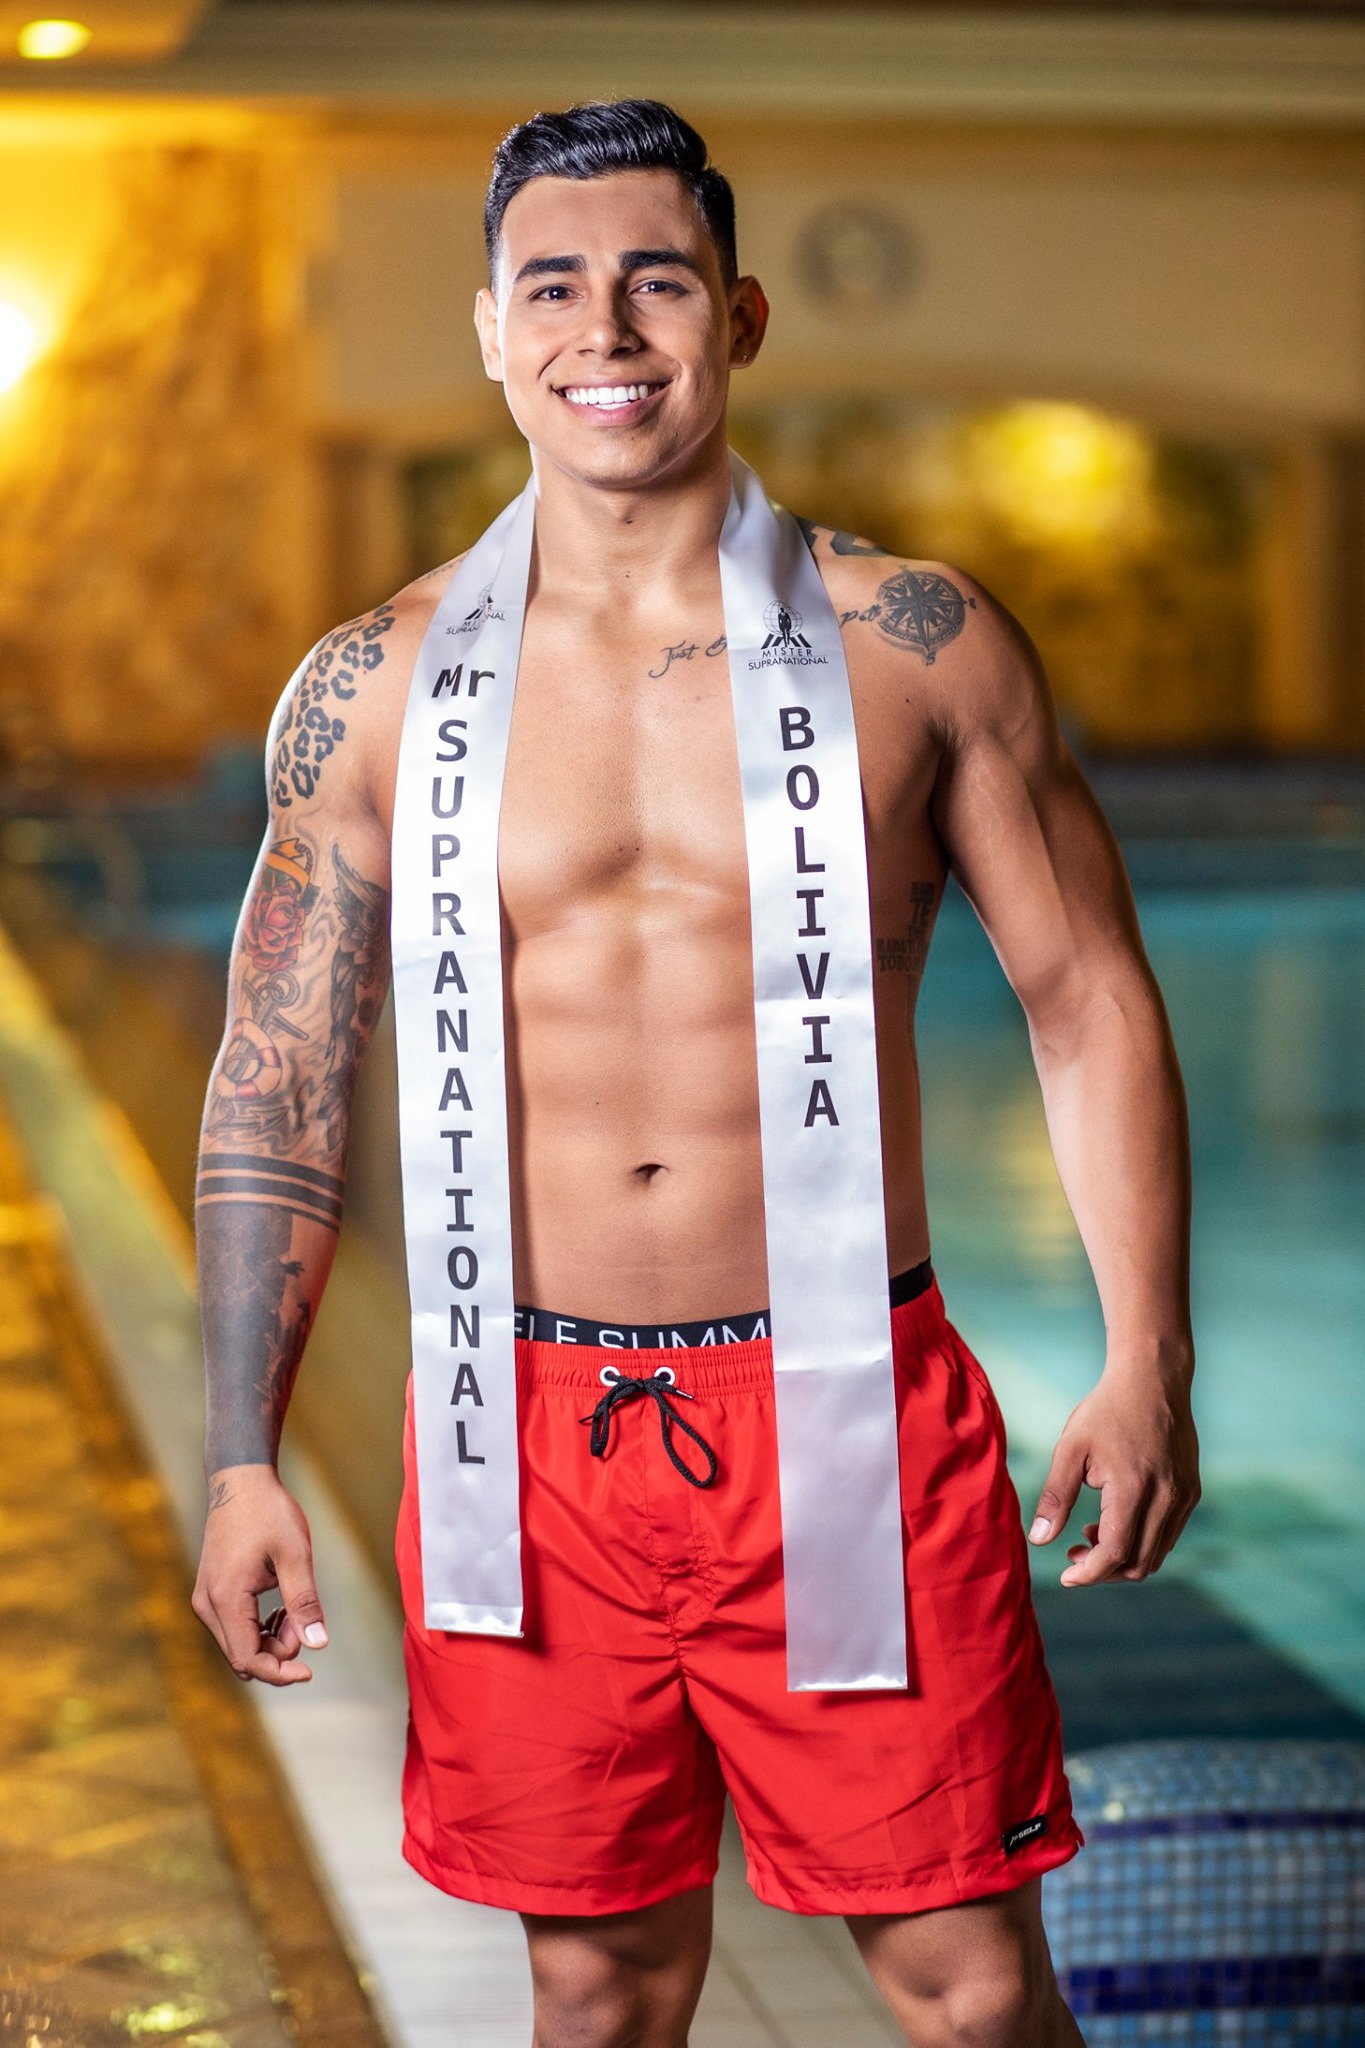 Mister Supranational 2019 Official Swimwear 213